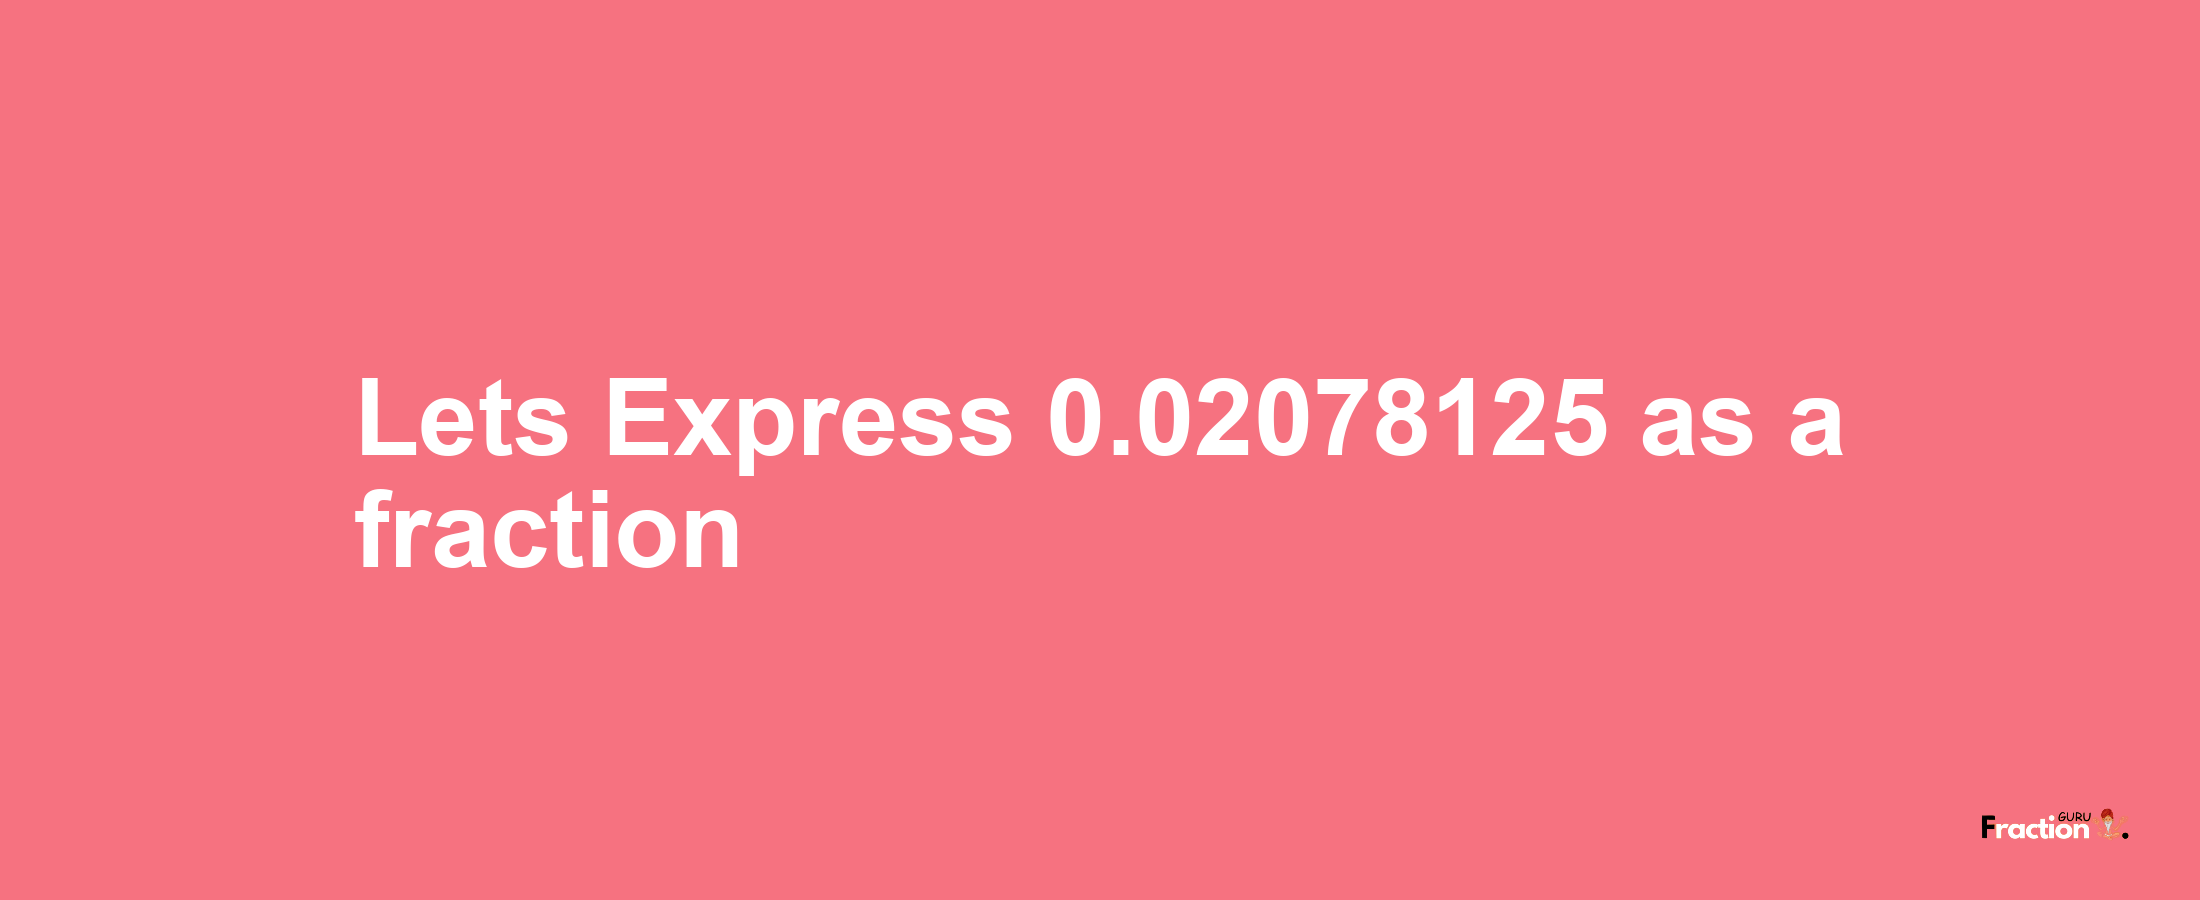 Lets Express 0.02078125 as afraction